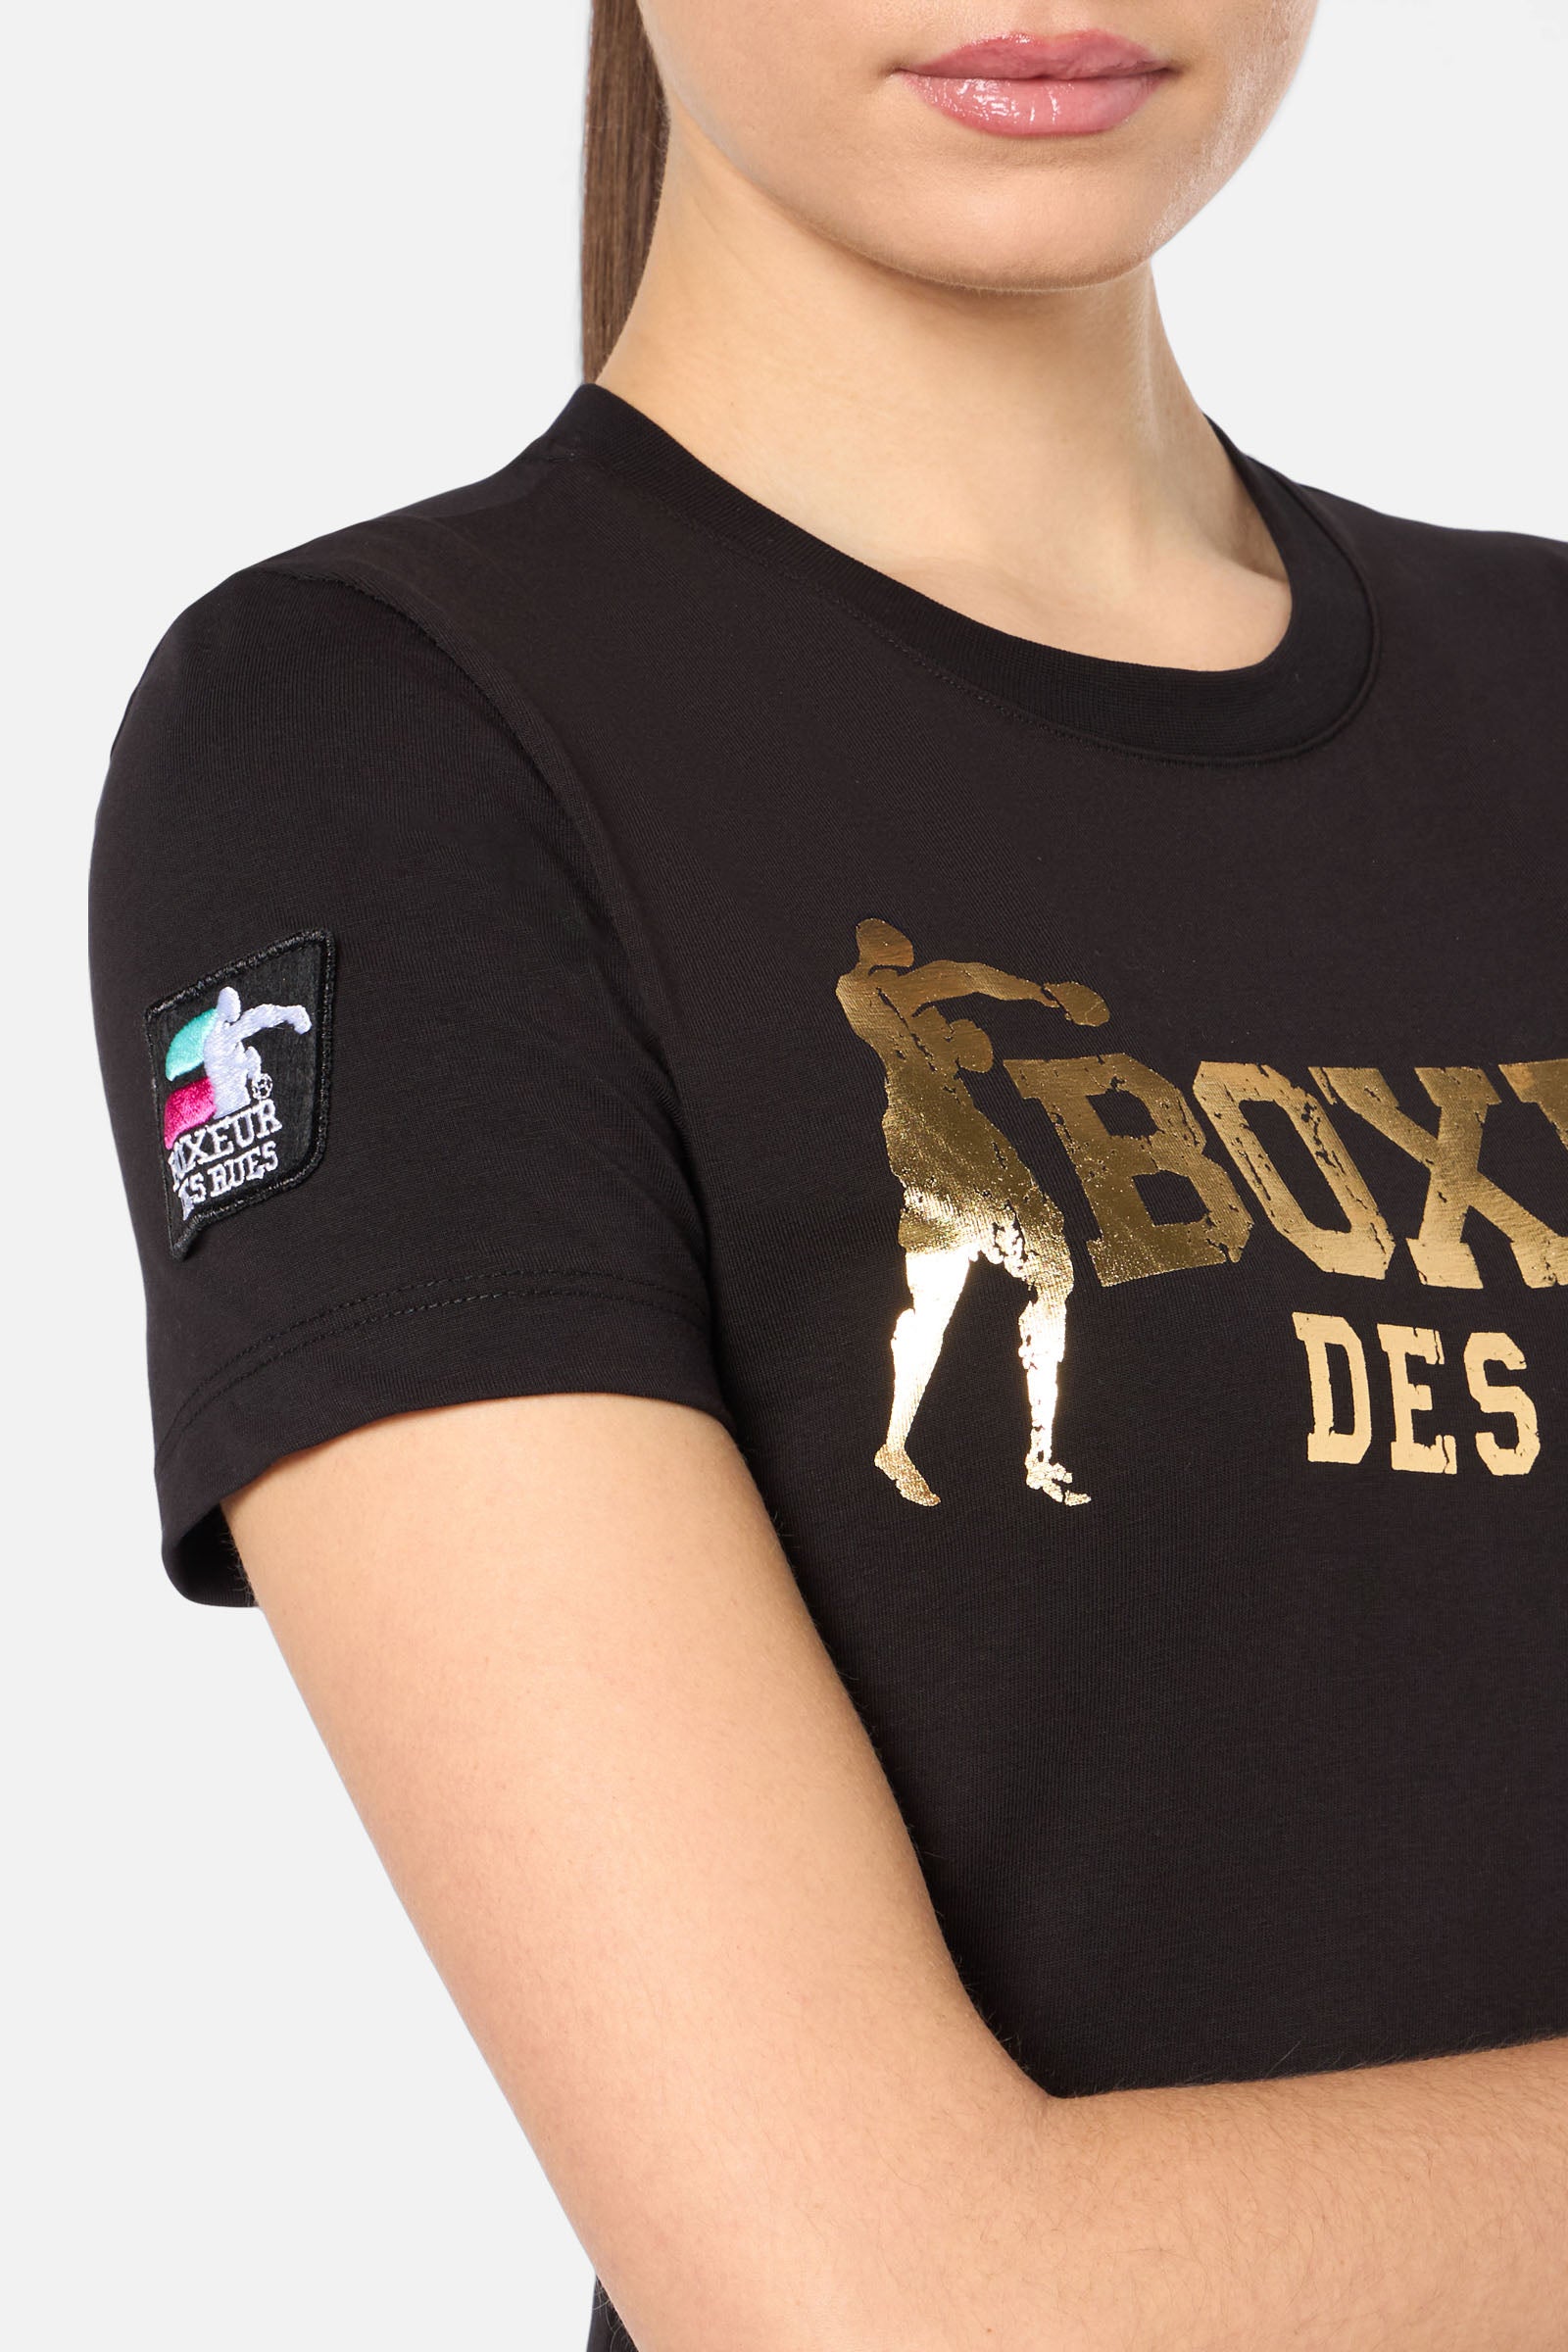 Iconic Logo Tee in Black-Gold T-Shirts Boxeur des Rues   